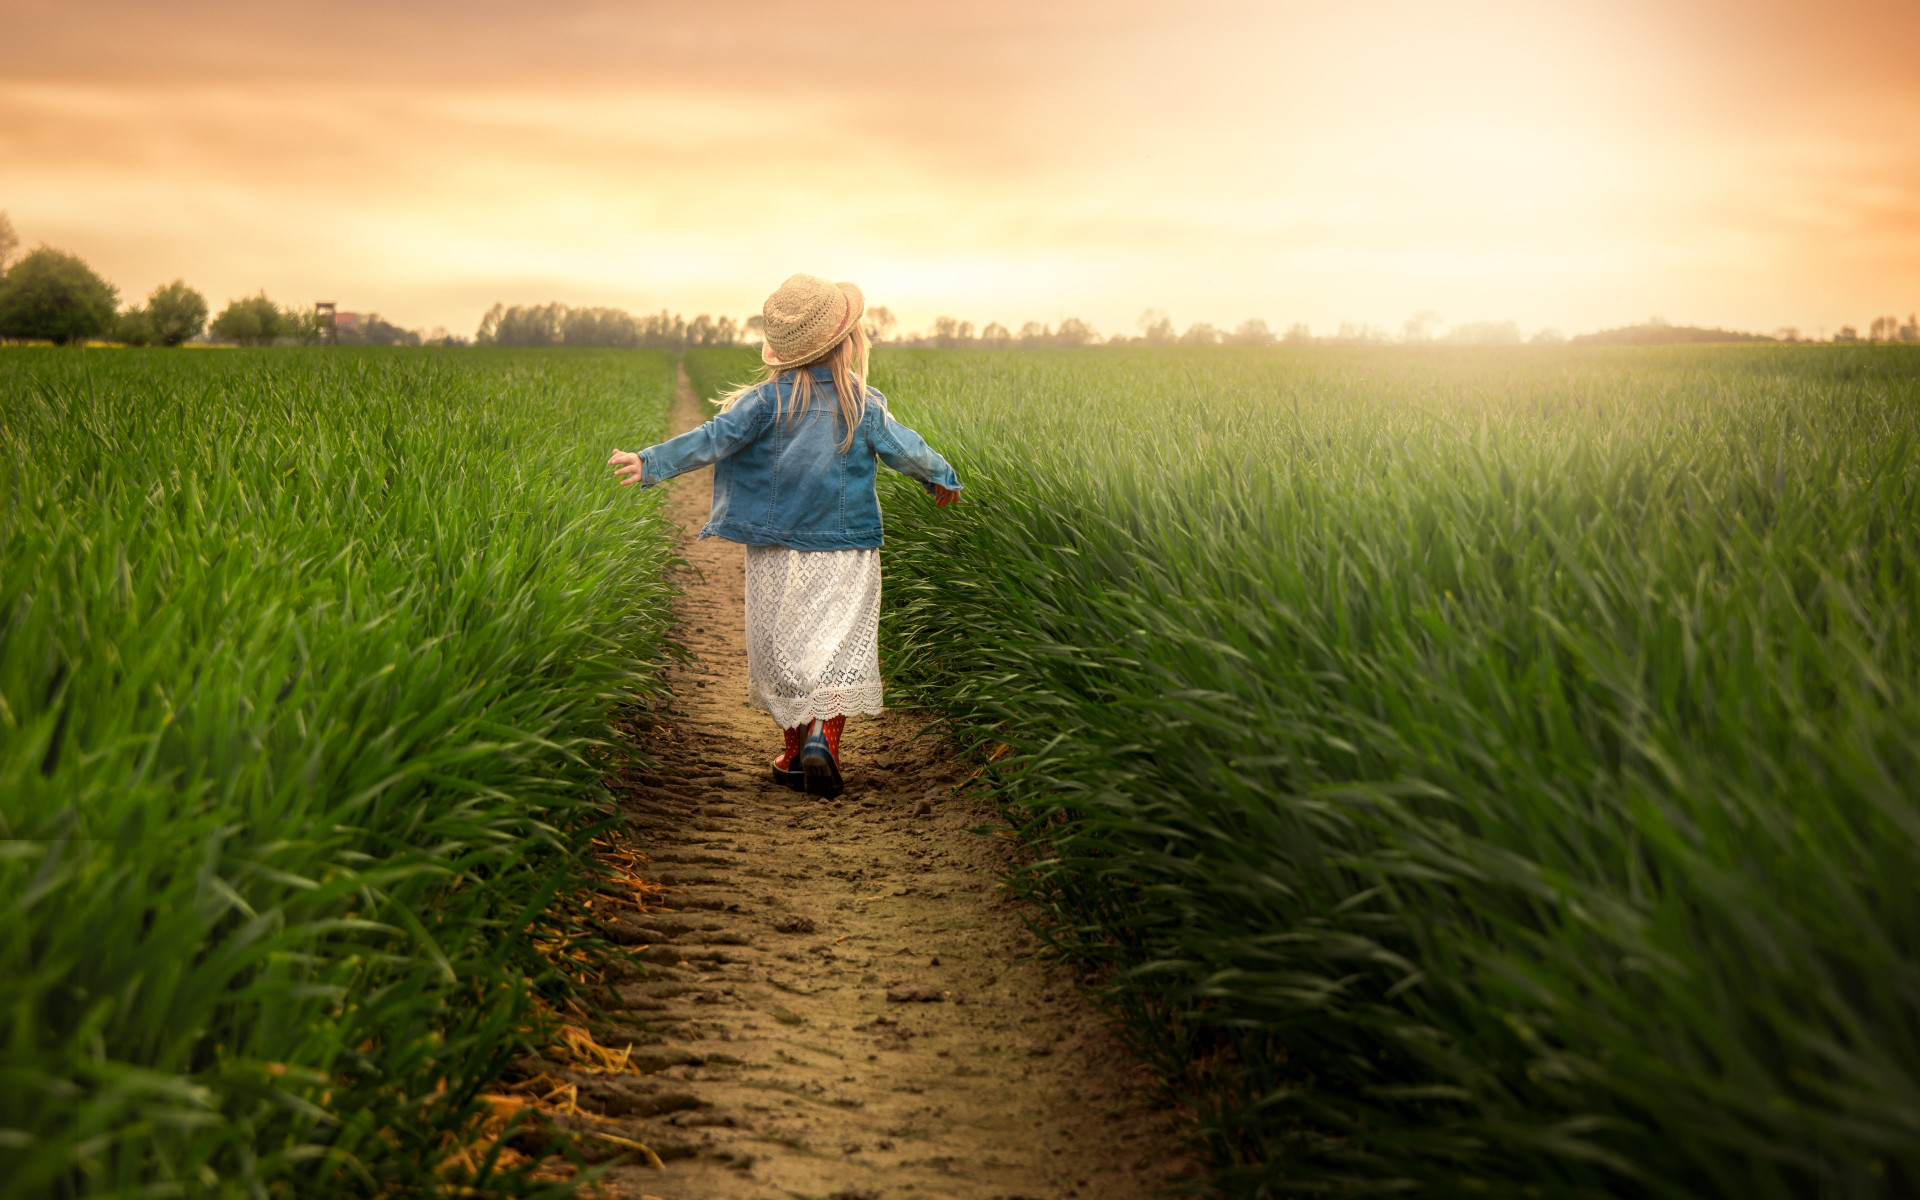 Child in the green field at sunset wallpaper 1920x1200